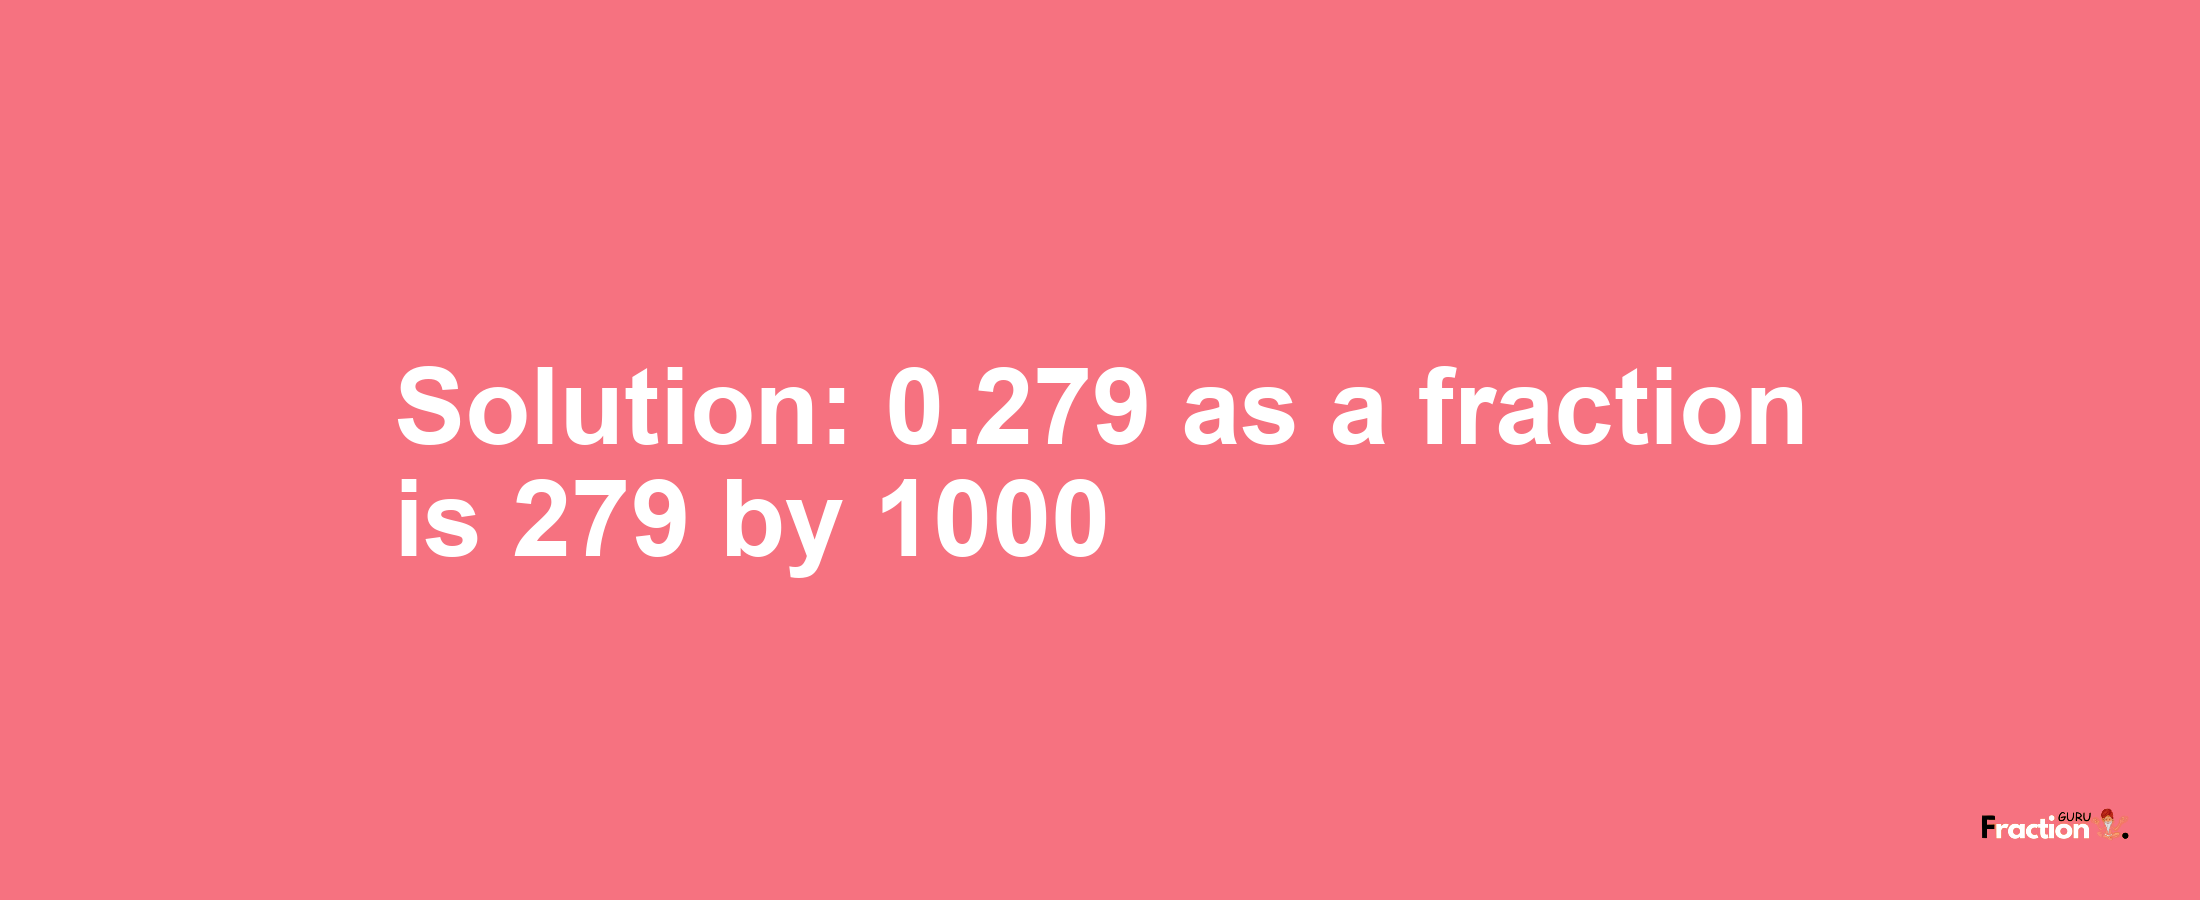 Solution:0.279 as a fraction is 279/1000